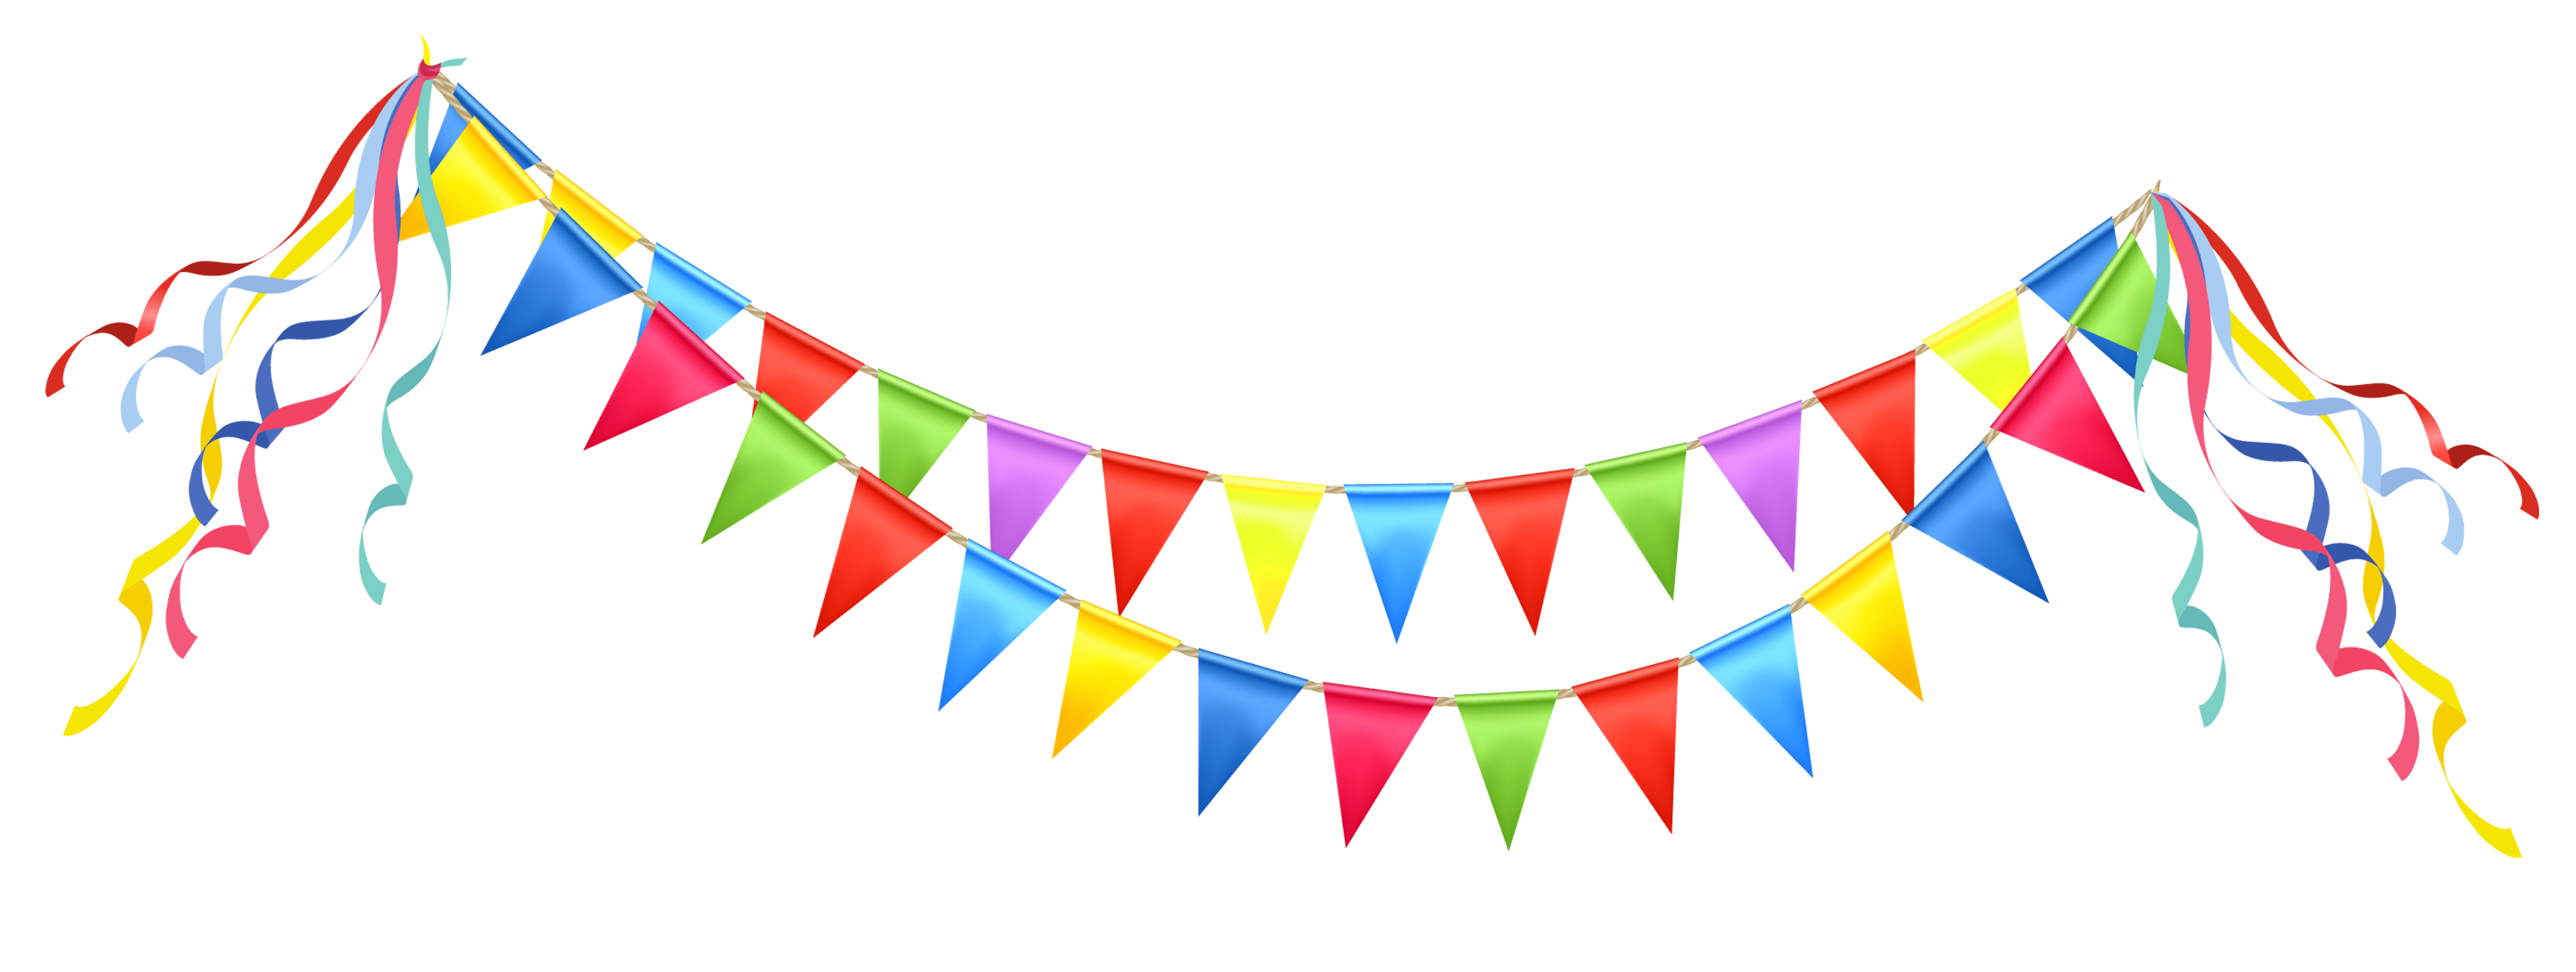 streamers clipart birthday party